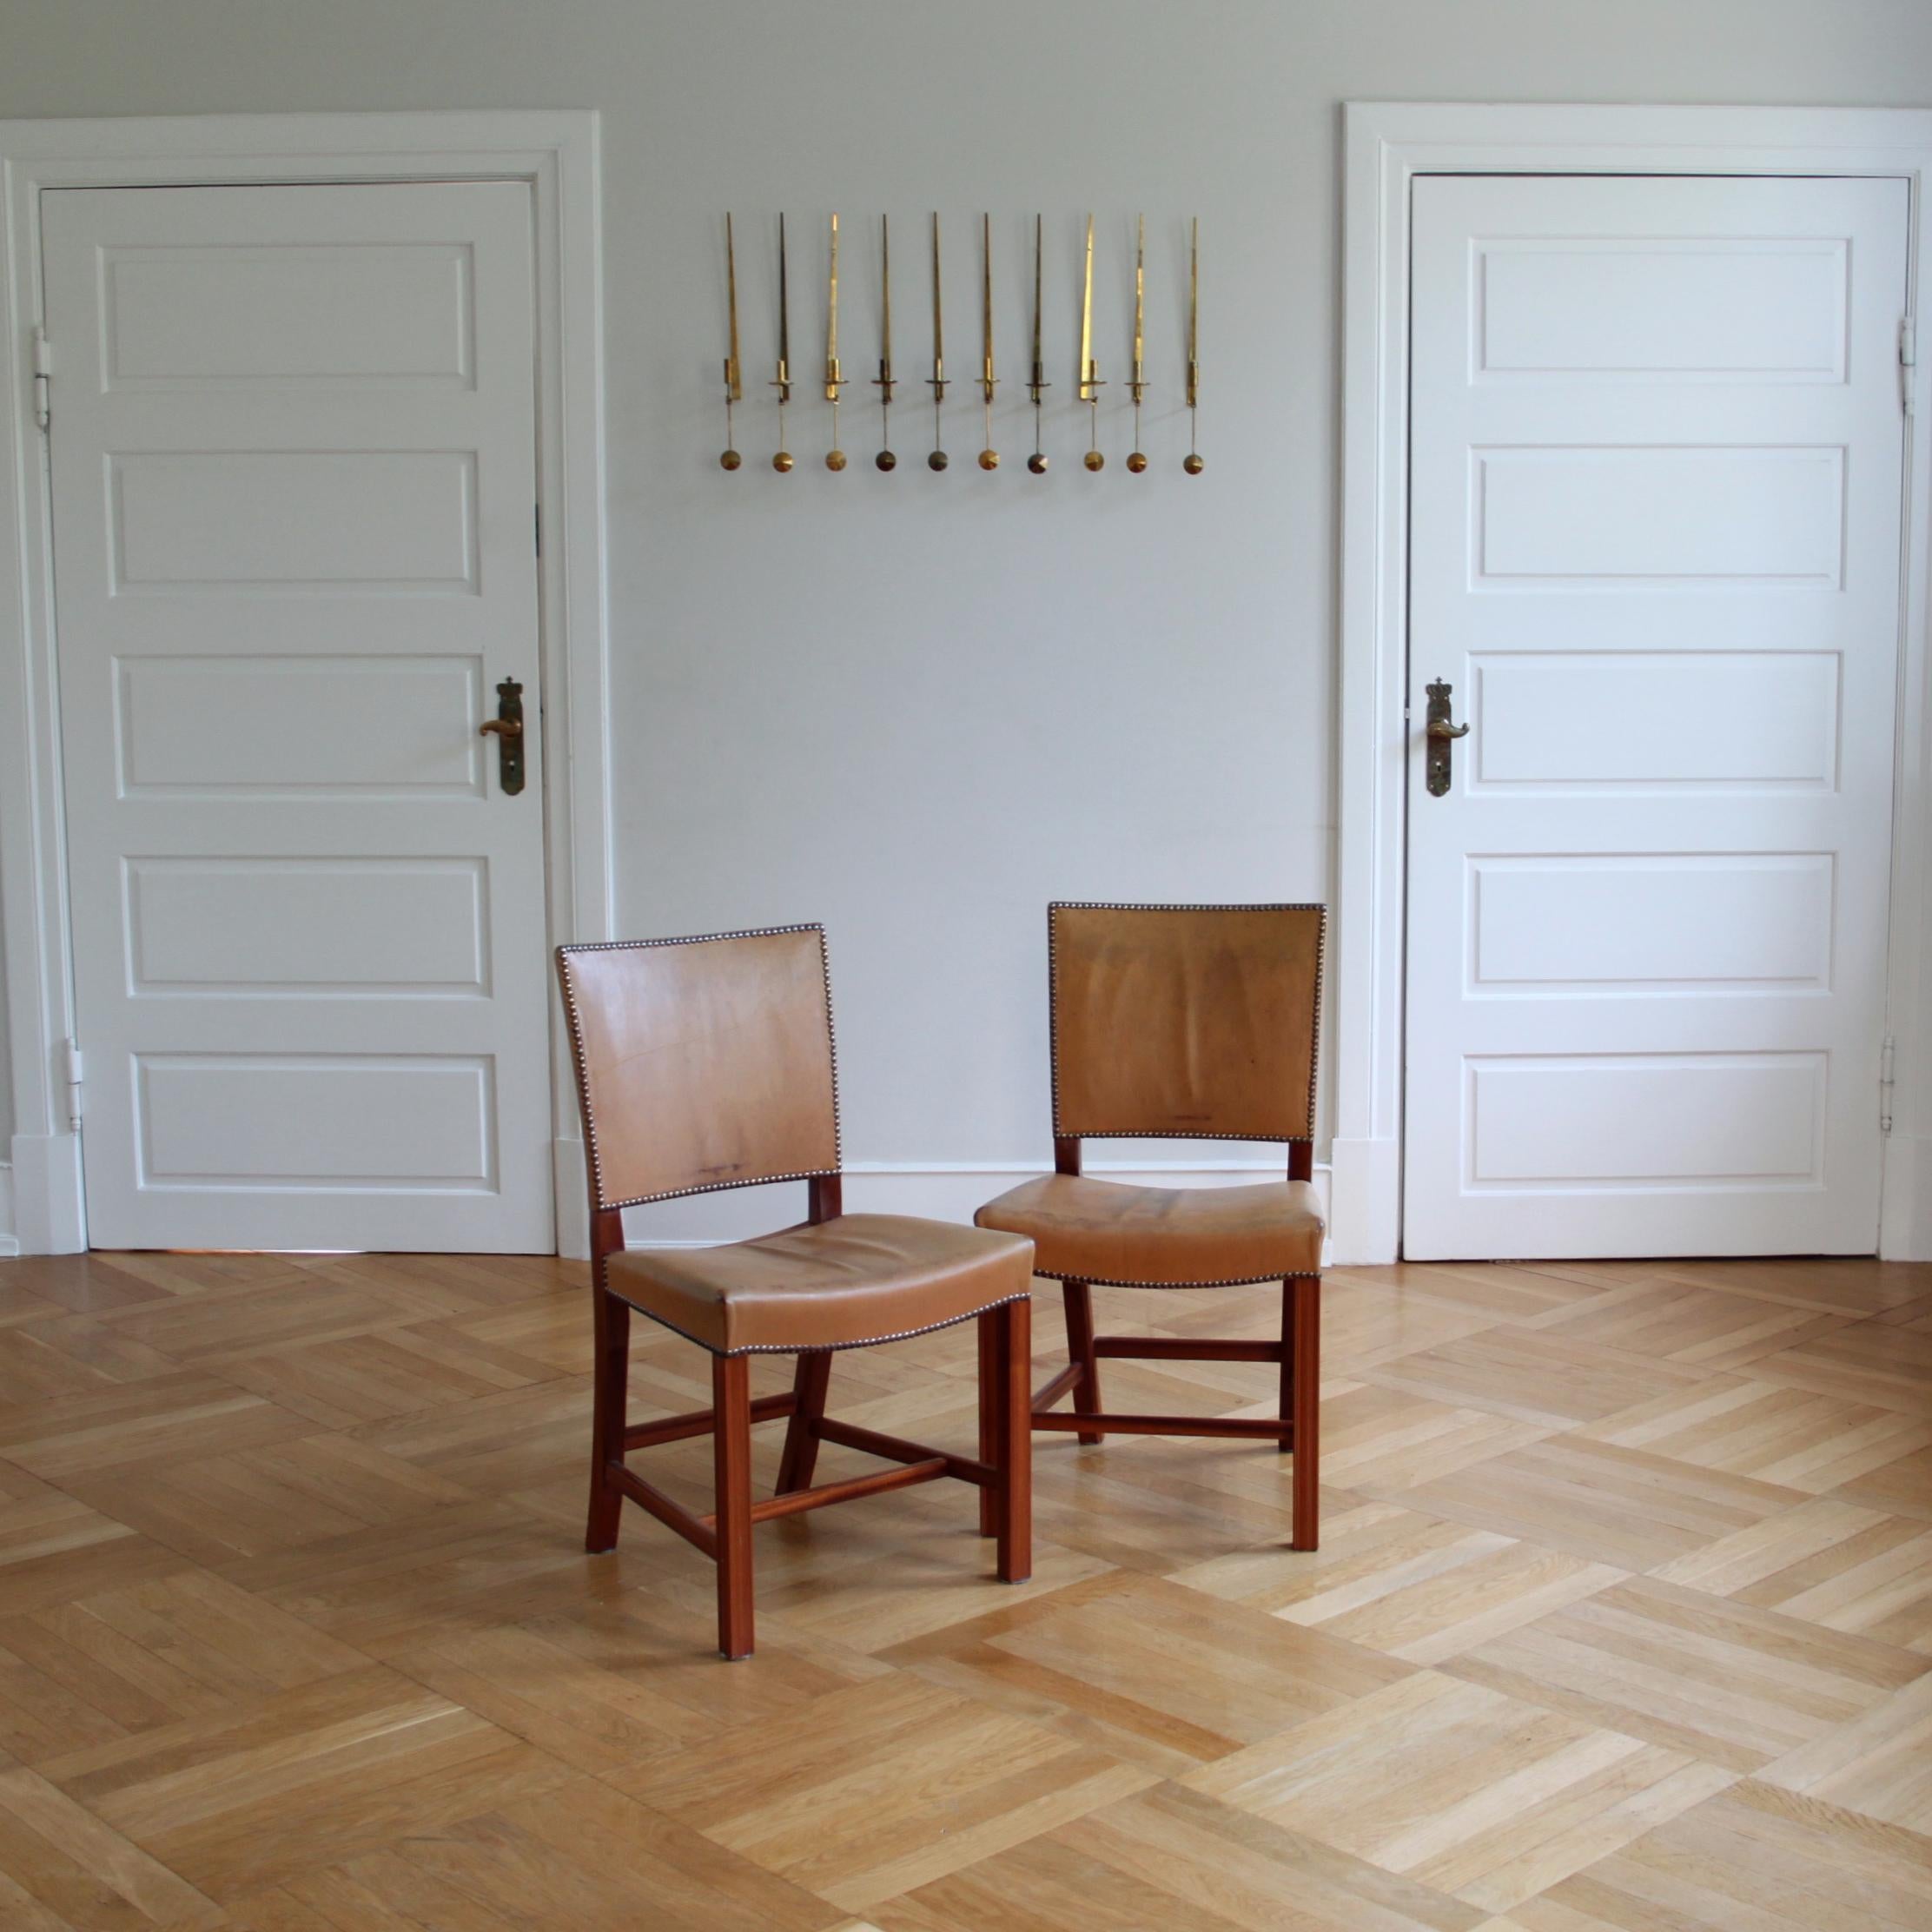 Kaare Klint & Rud Rasmussen Snedkerier - Scandinavian Modern Design.

An beautiful pair of Kaare Klint red chairs, executed by cabinetmaker Rud. Rasmussen, Denmark.

Profiled legs of mahogany, seat and back upholstered with leather with patina and